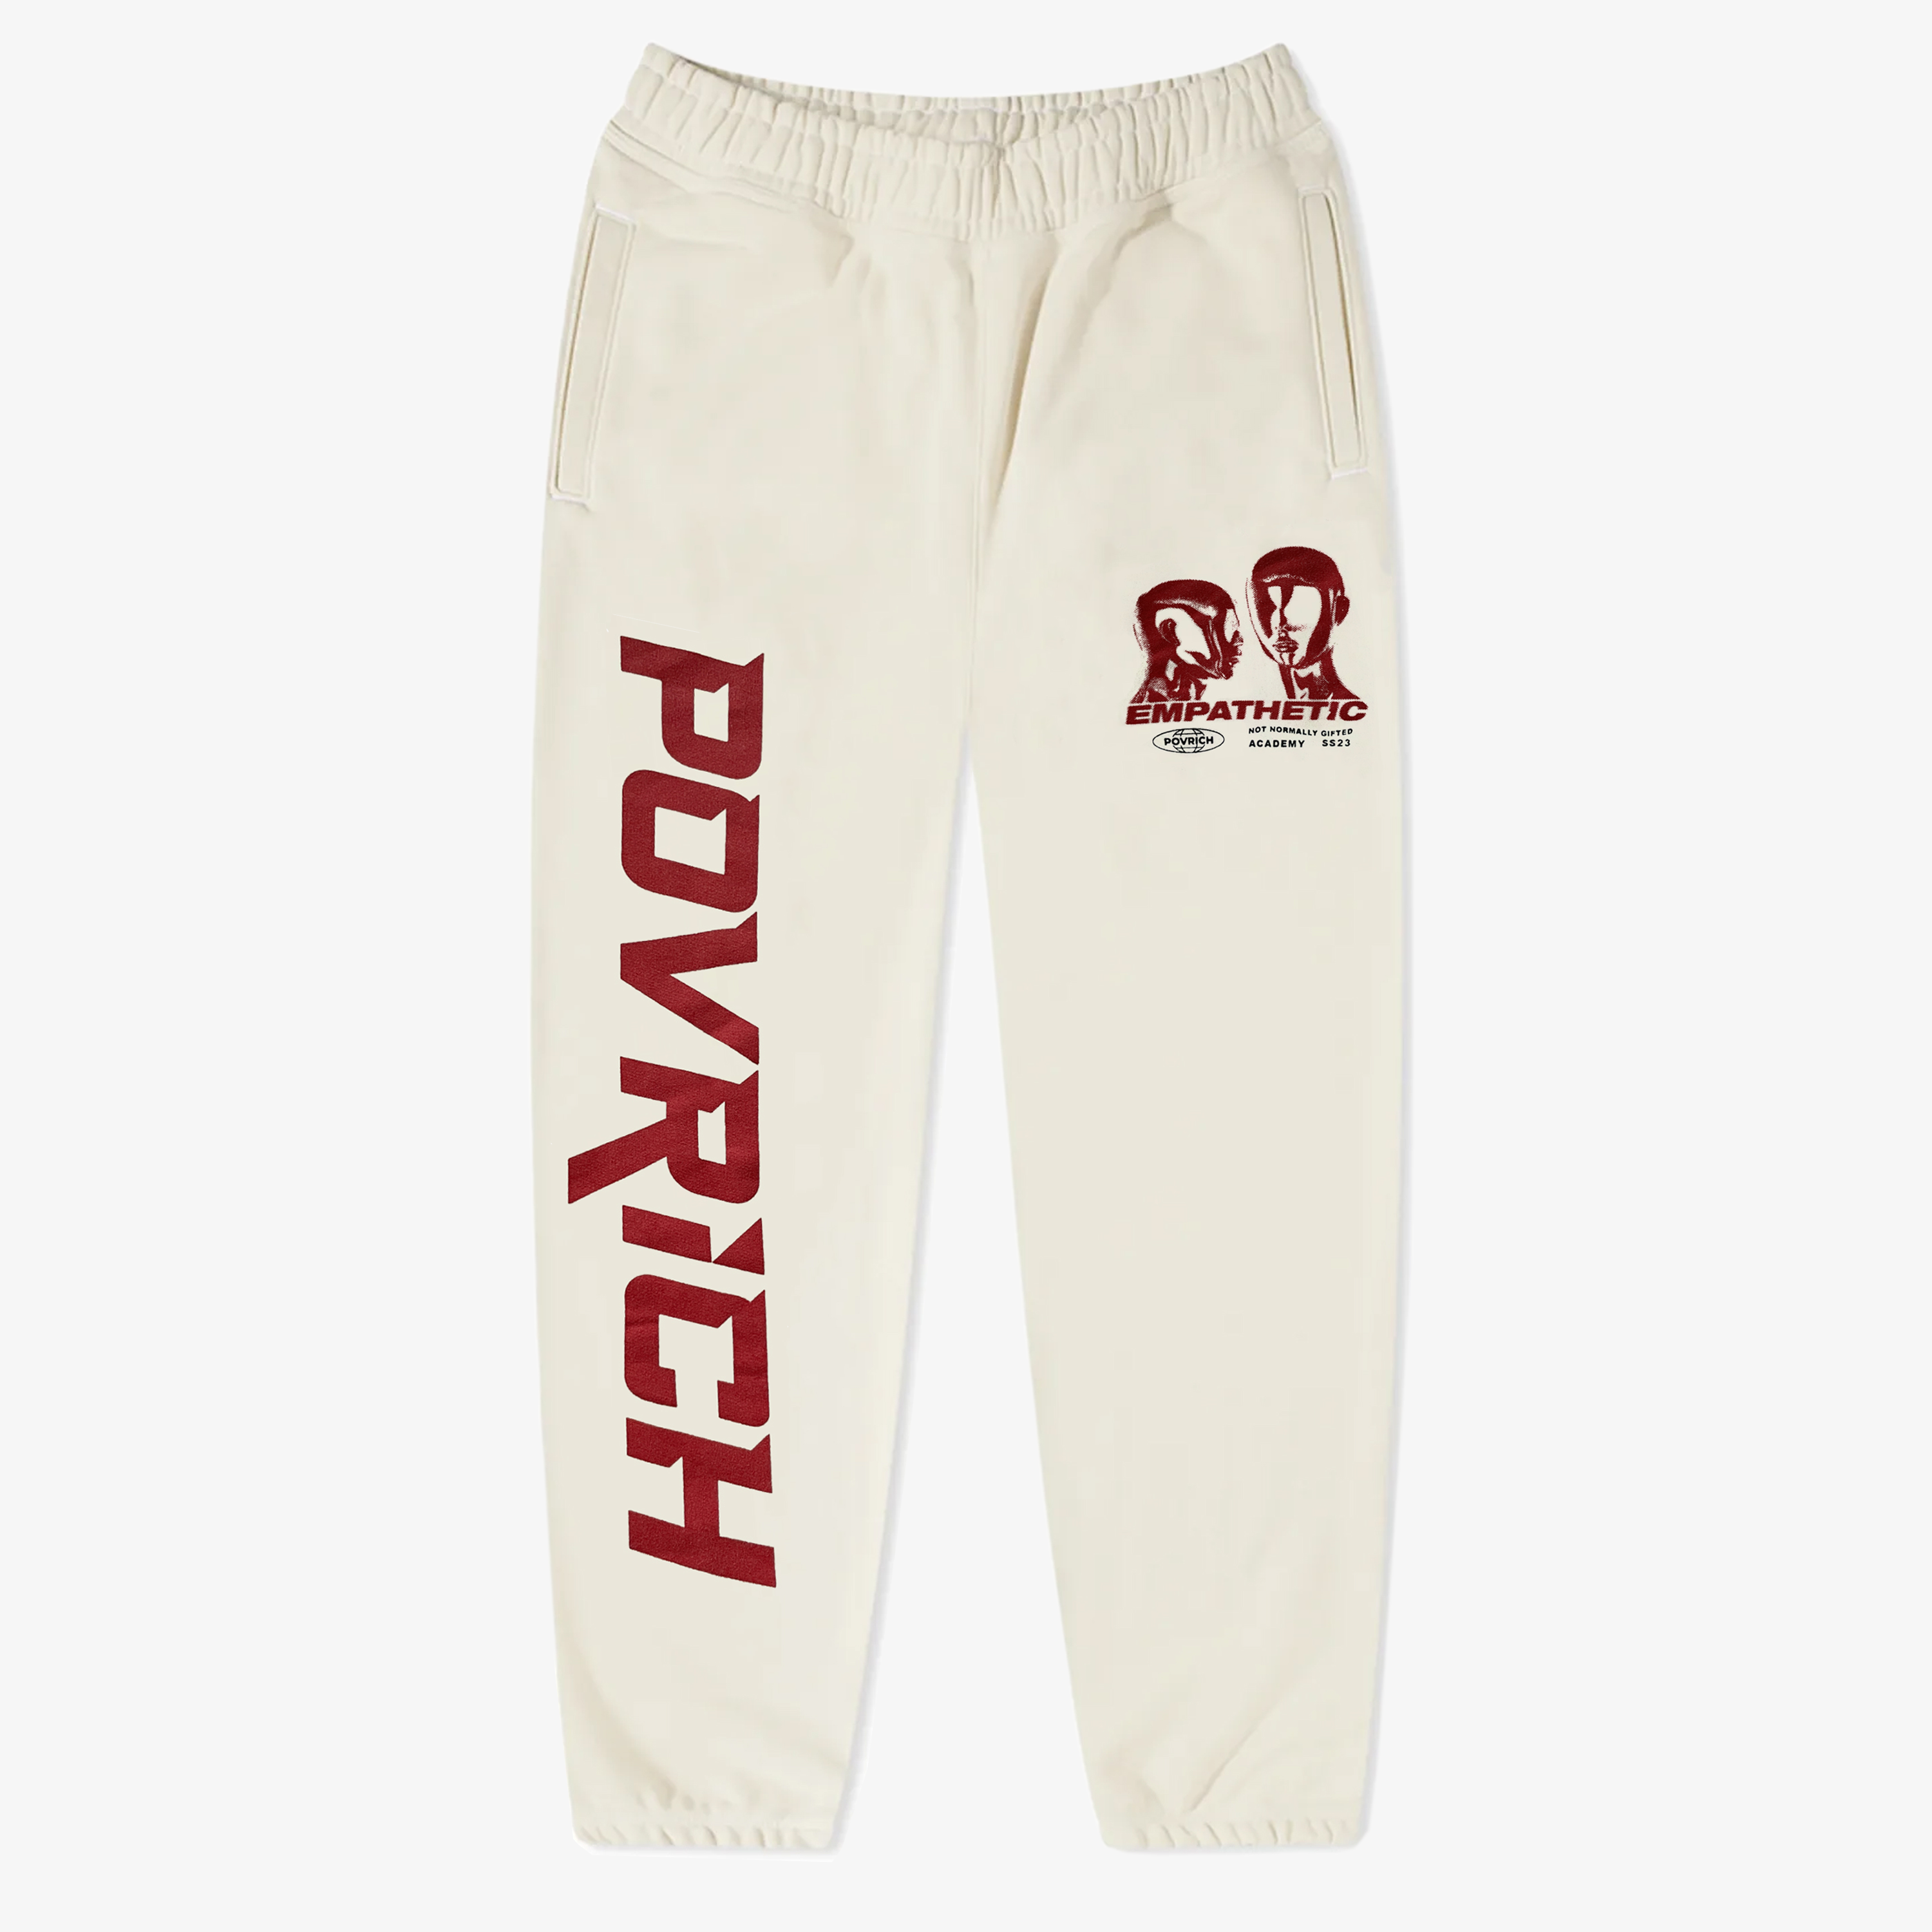 Empathetic Joggers by Povrich, featuring a tapered fit, elasticated waistband, and drawstring closure. Made from premium cotton material for maximum comfort. Creme color with red graphic designs on left & right legs. 